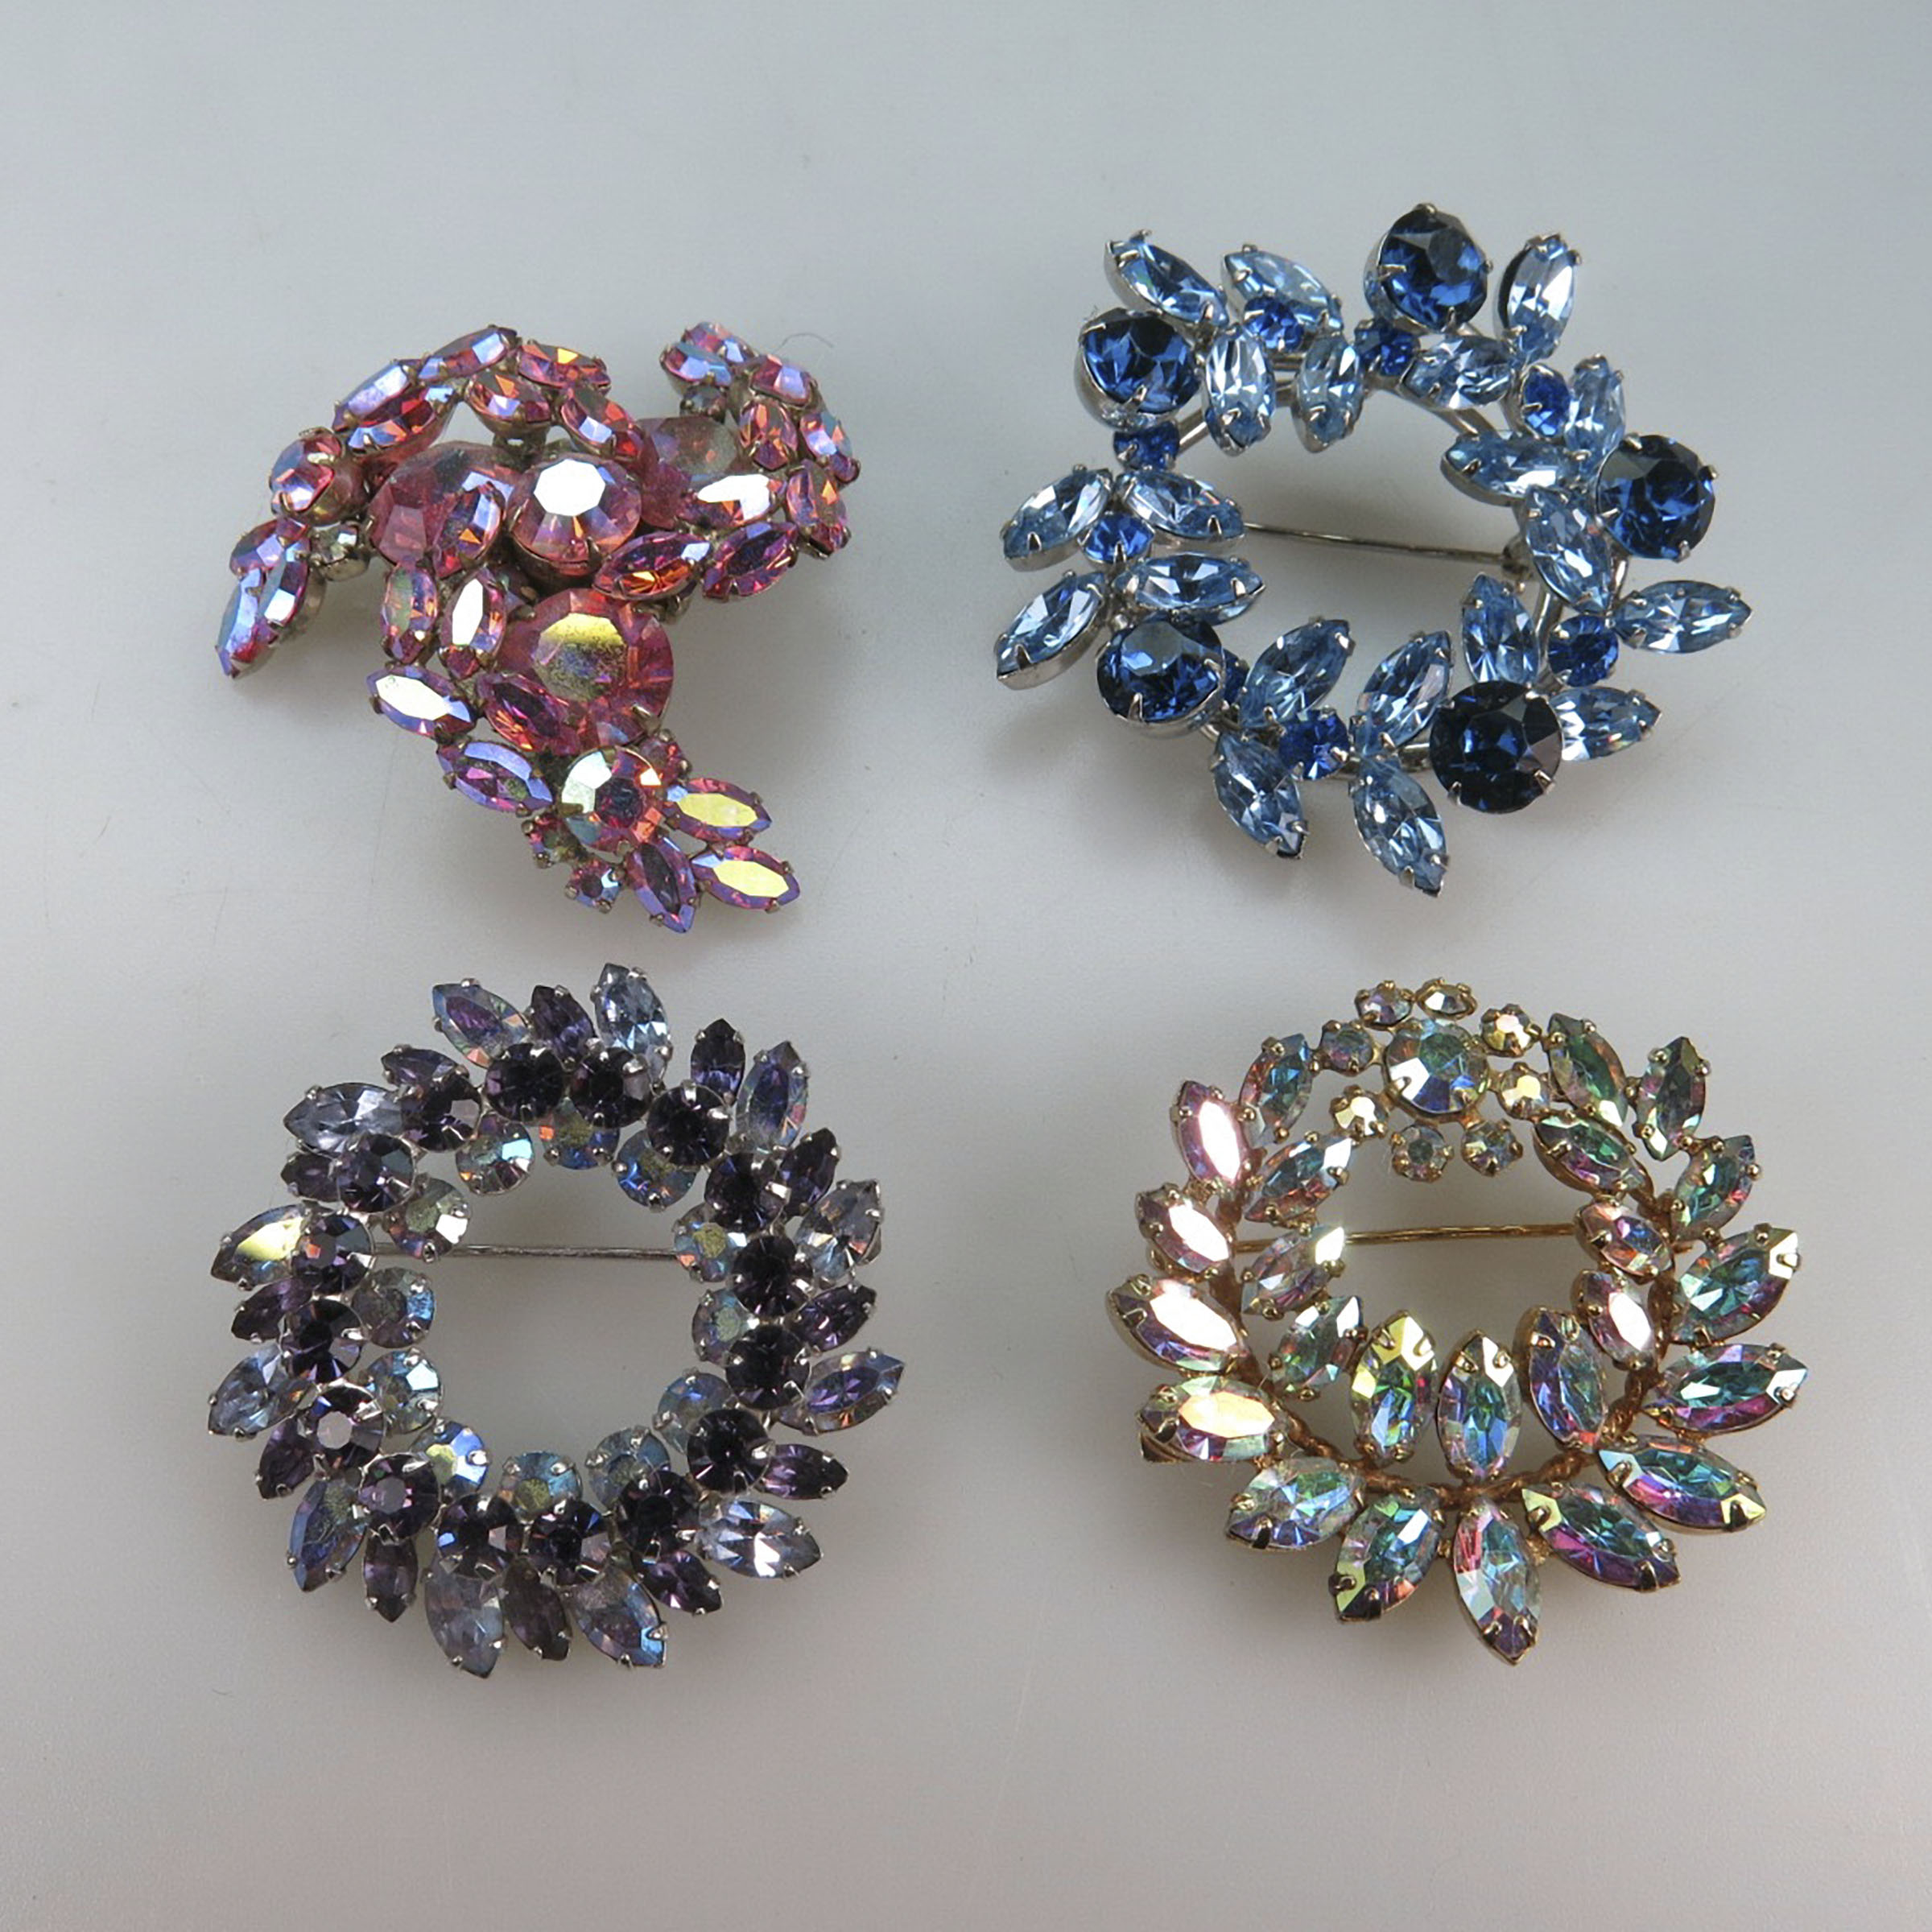 Four Sherman Silver Tone And Gold Tone Metal Brooches